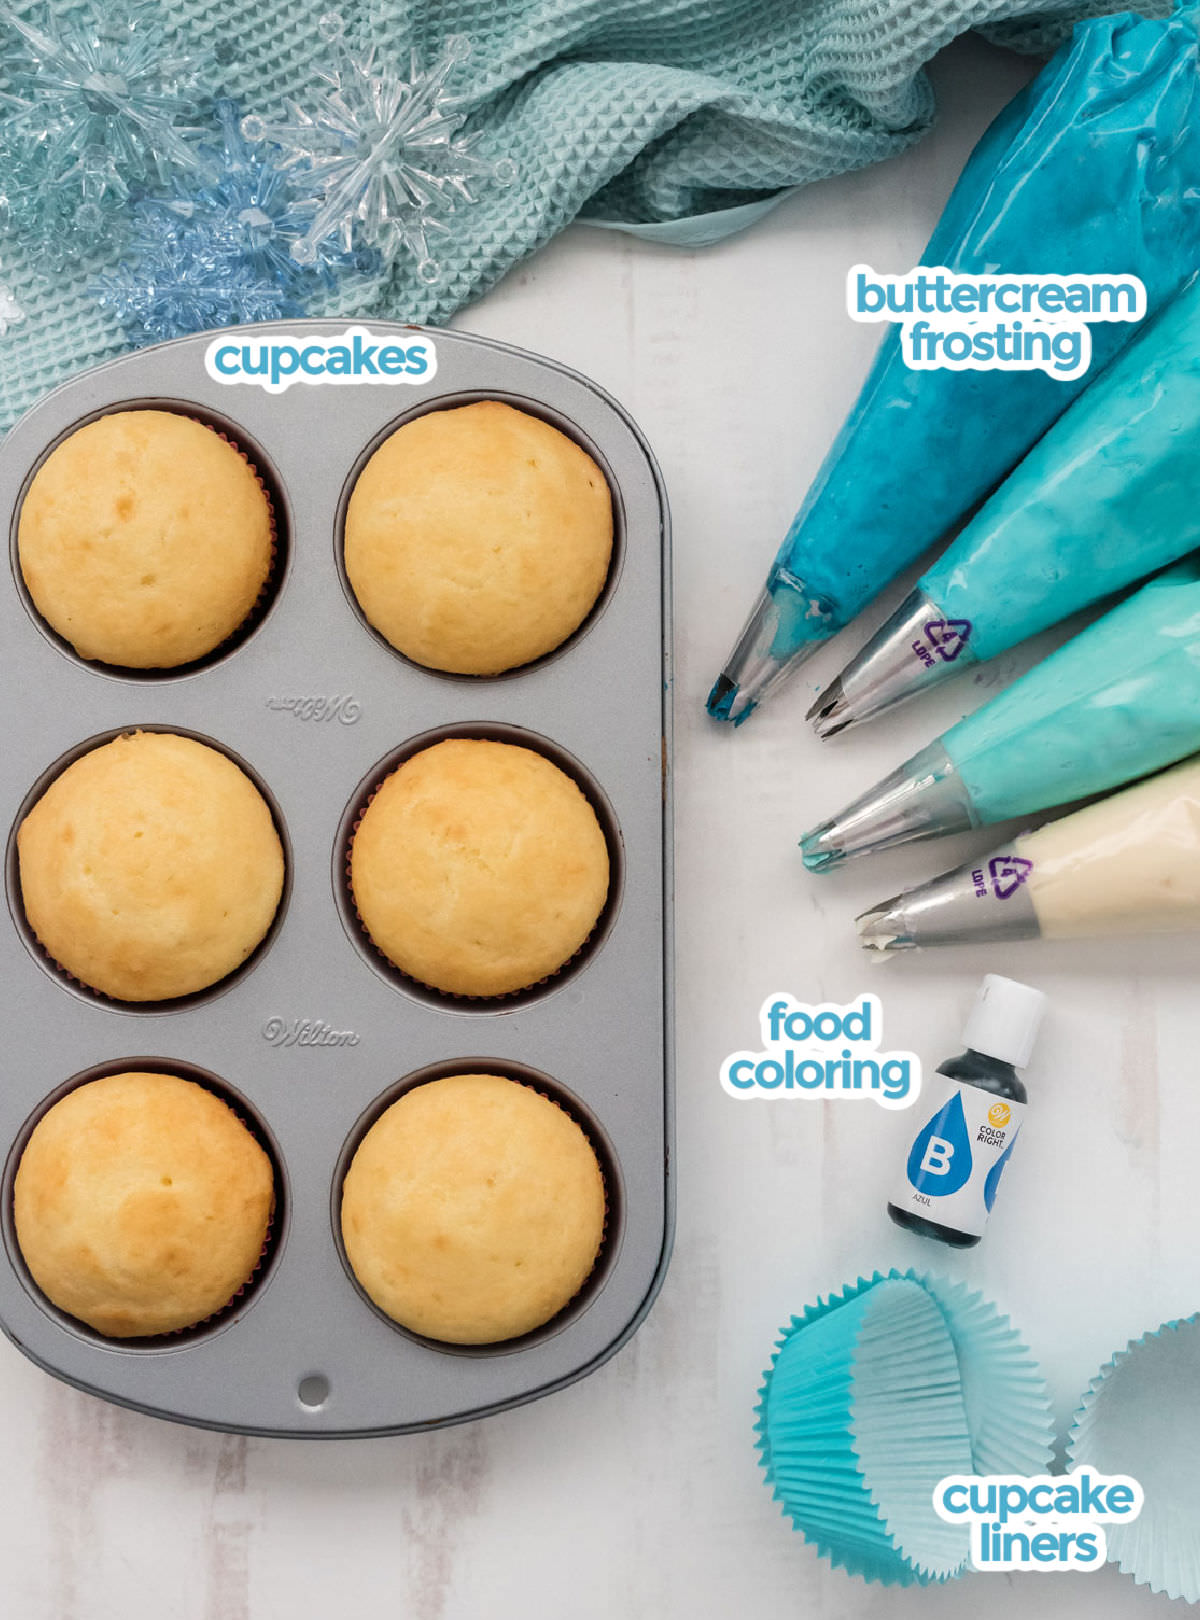 All the ingredients you will need to make Frozen Ombre Swirl Cupcakes including vanilla cupcakes, buttercream frosting, food coloring and cupcake liners.